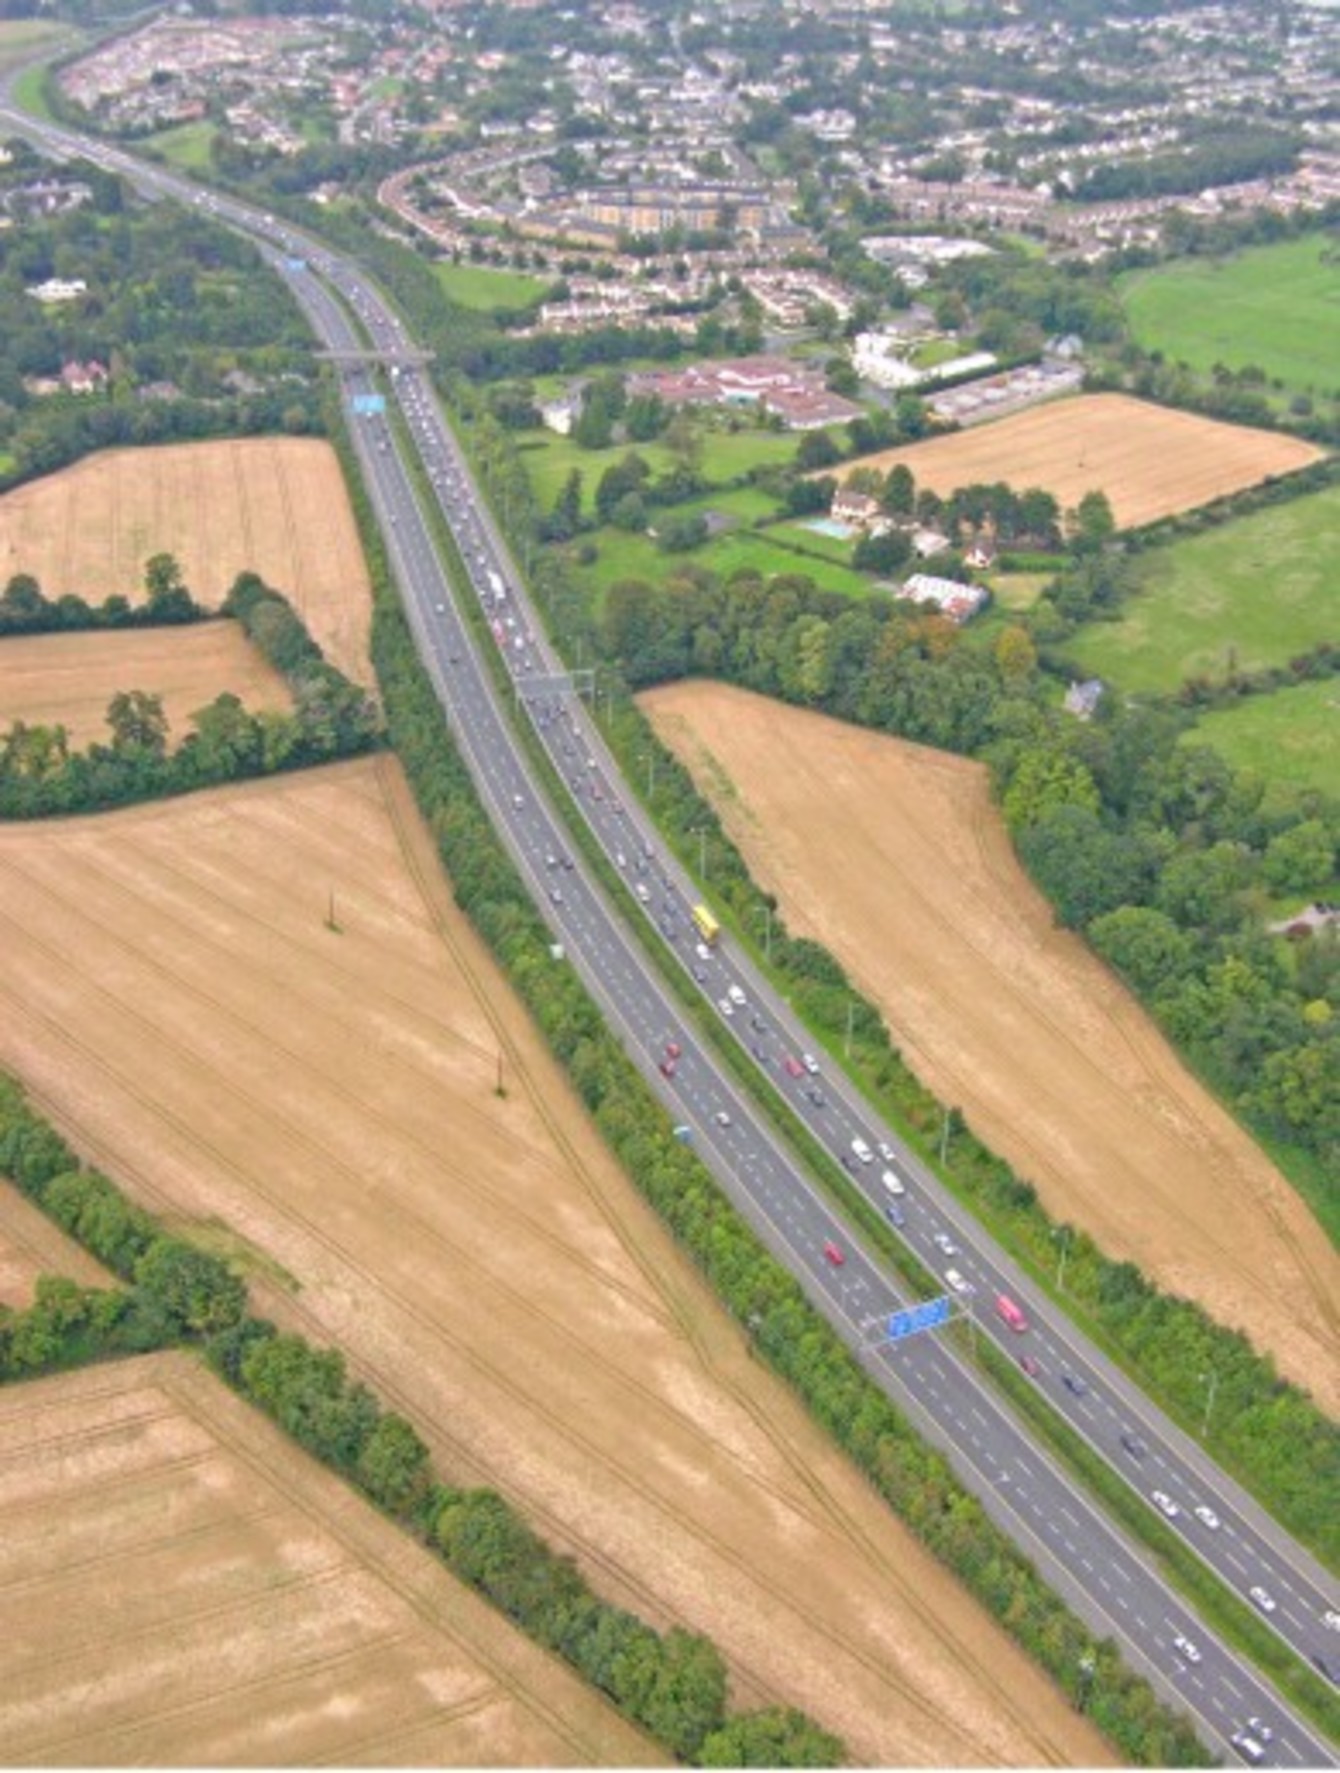 Third lane needed on N11 or Wicklow and Dún Laoghaire Rathdown will ...